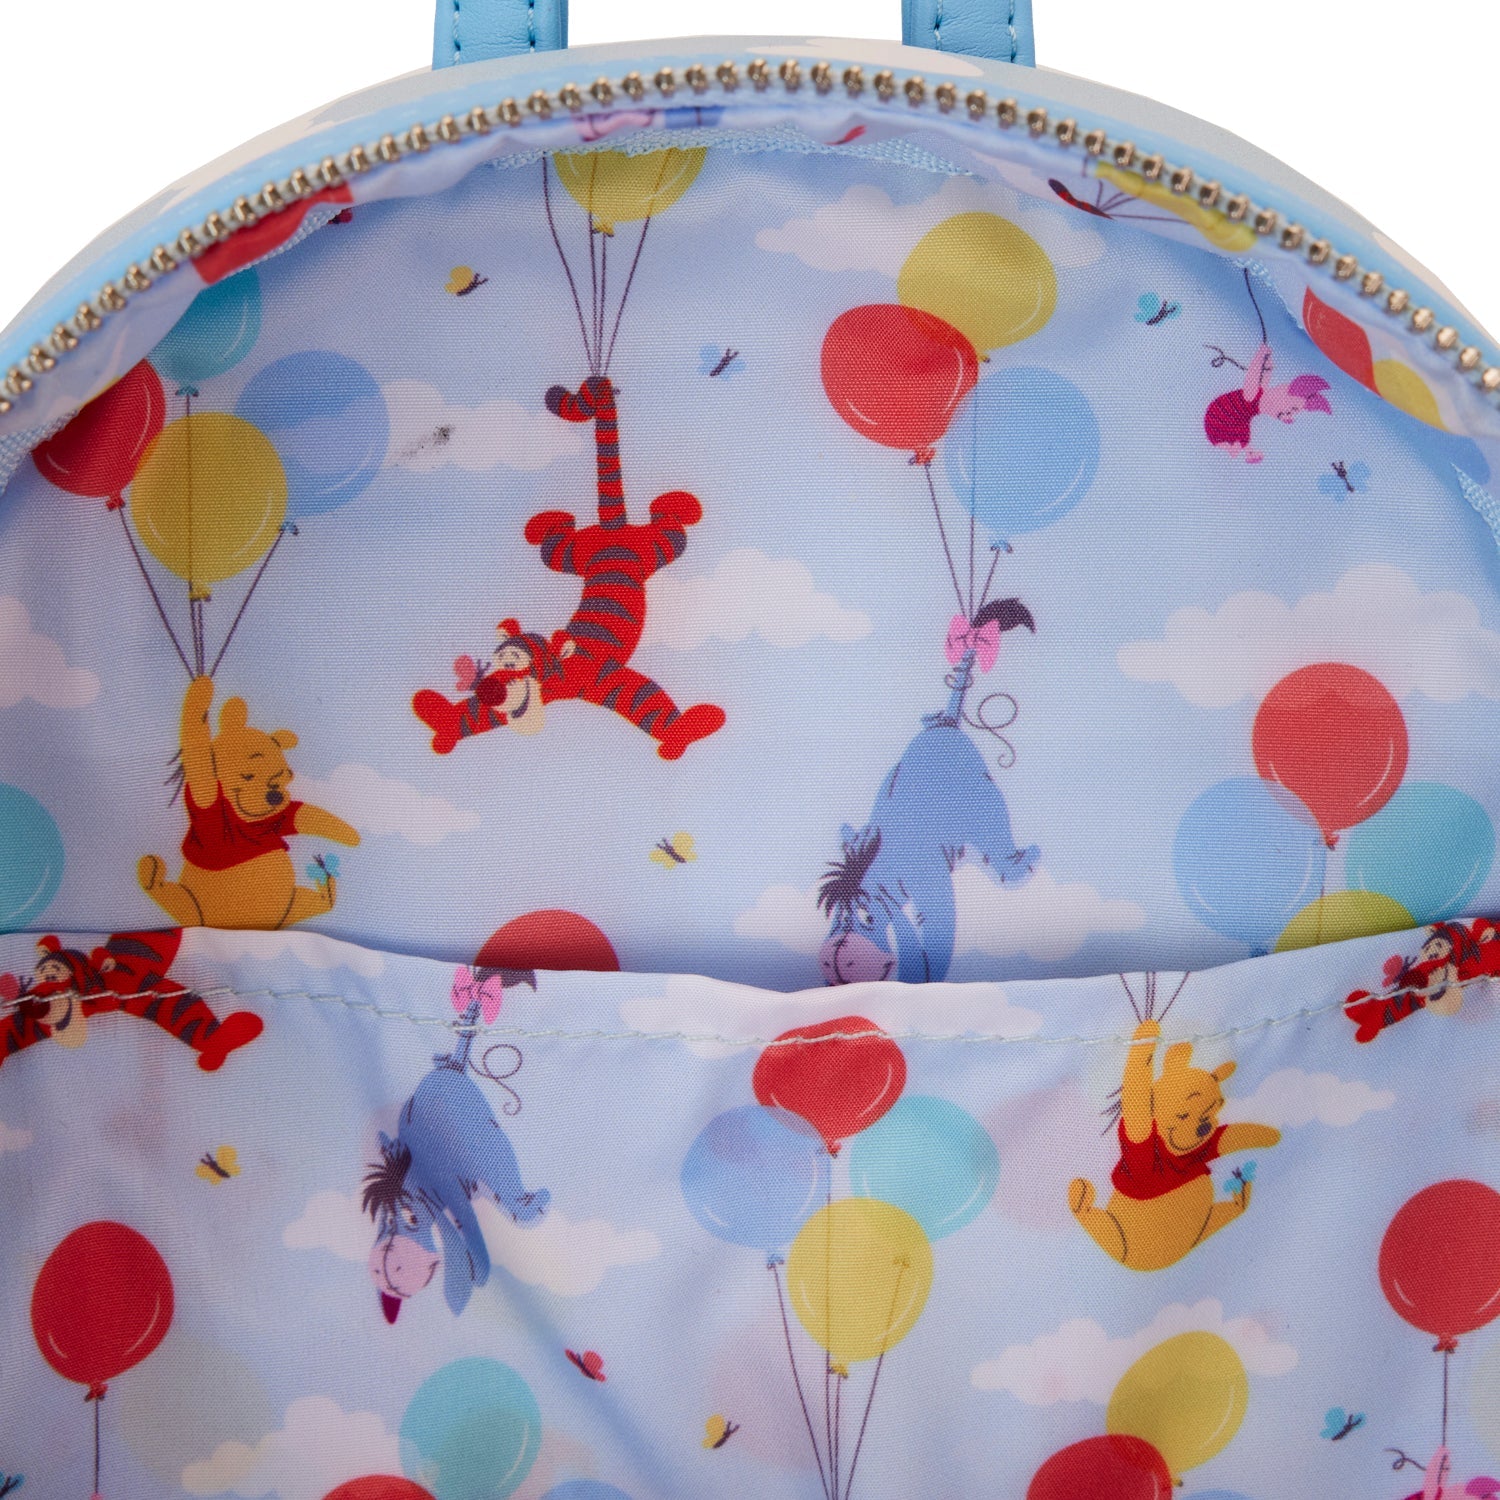 Loungefly x Disney Winnie the Pooh Balloons Mini Backpack - GeekCore